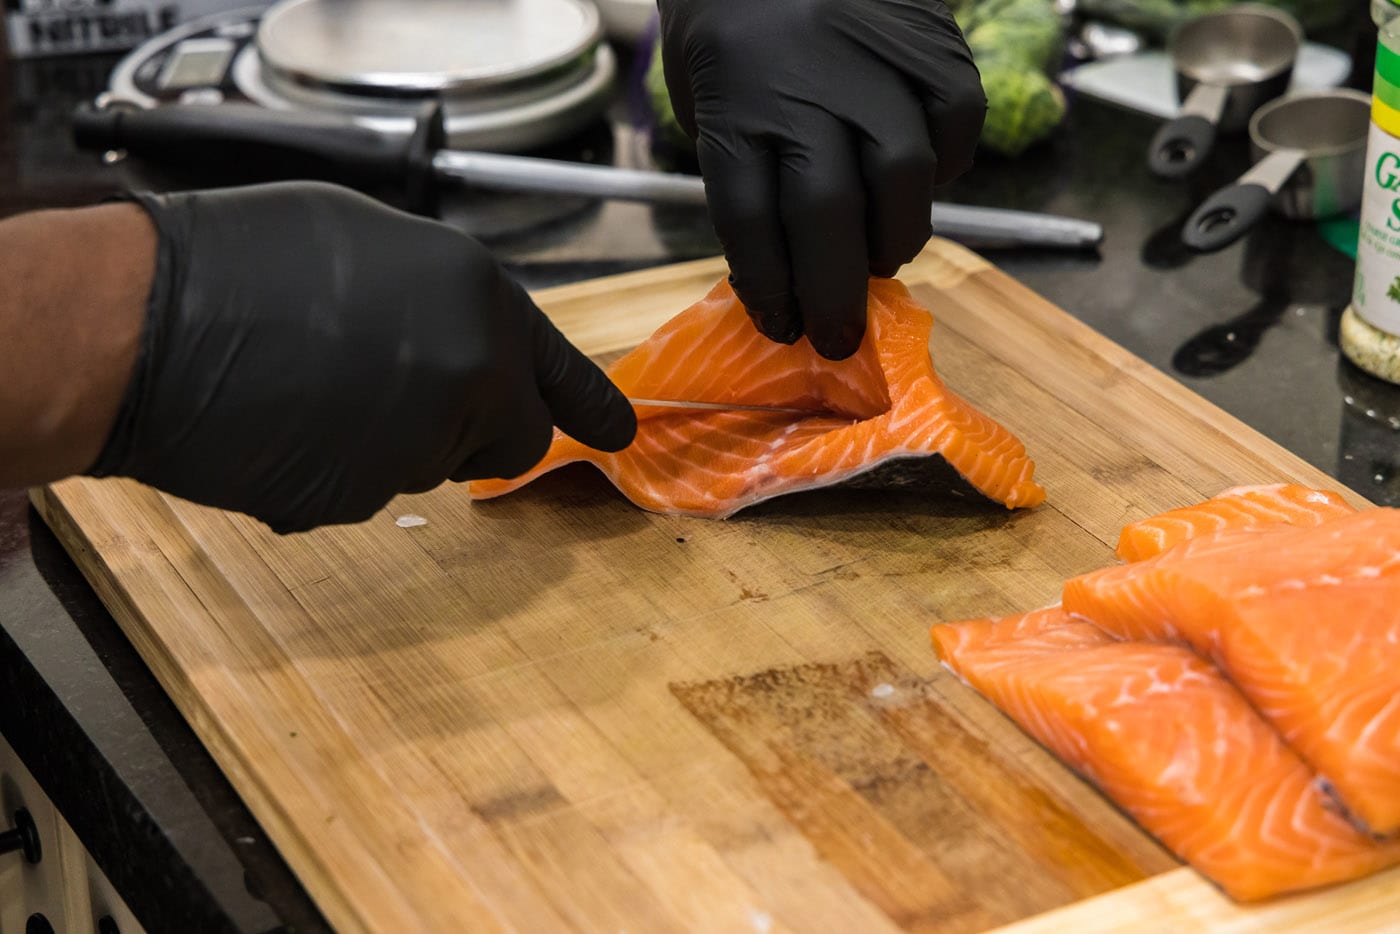 opening salmon pocket for stuffing